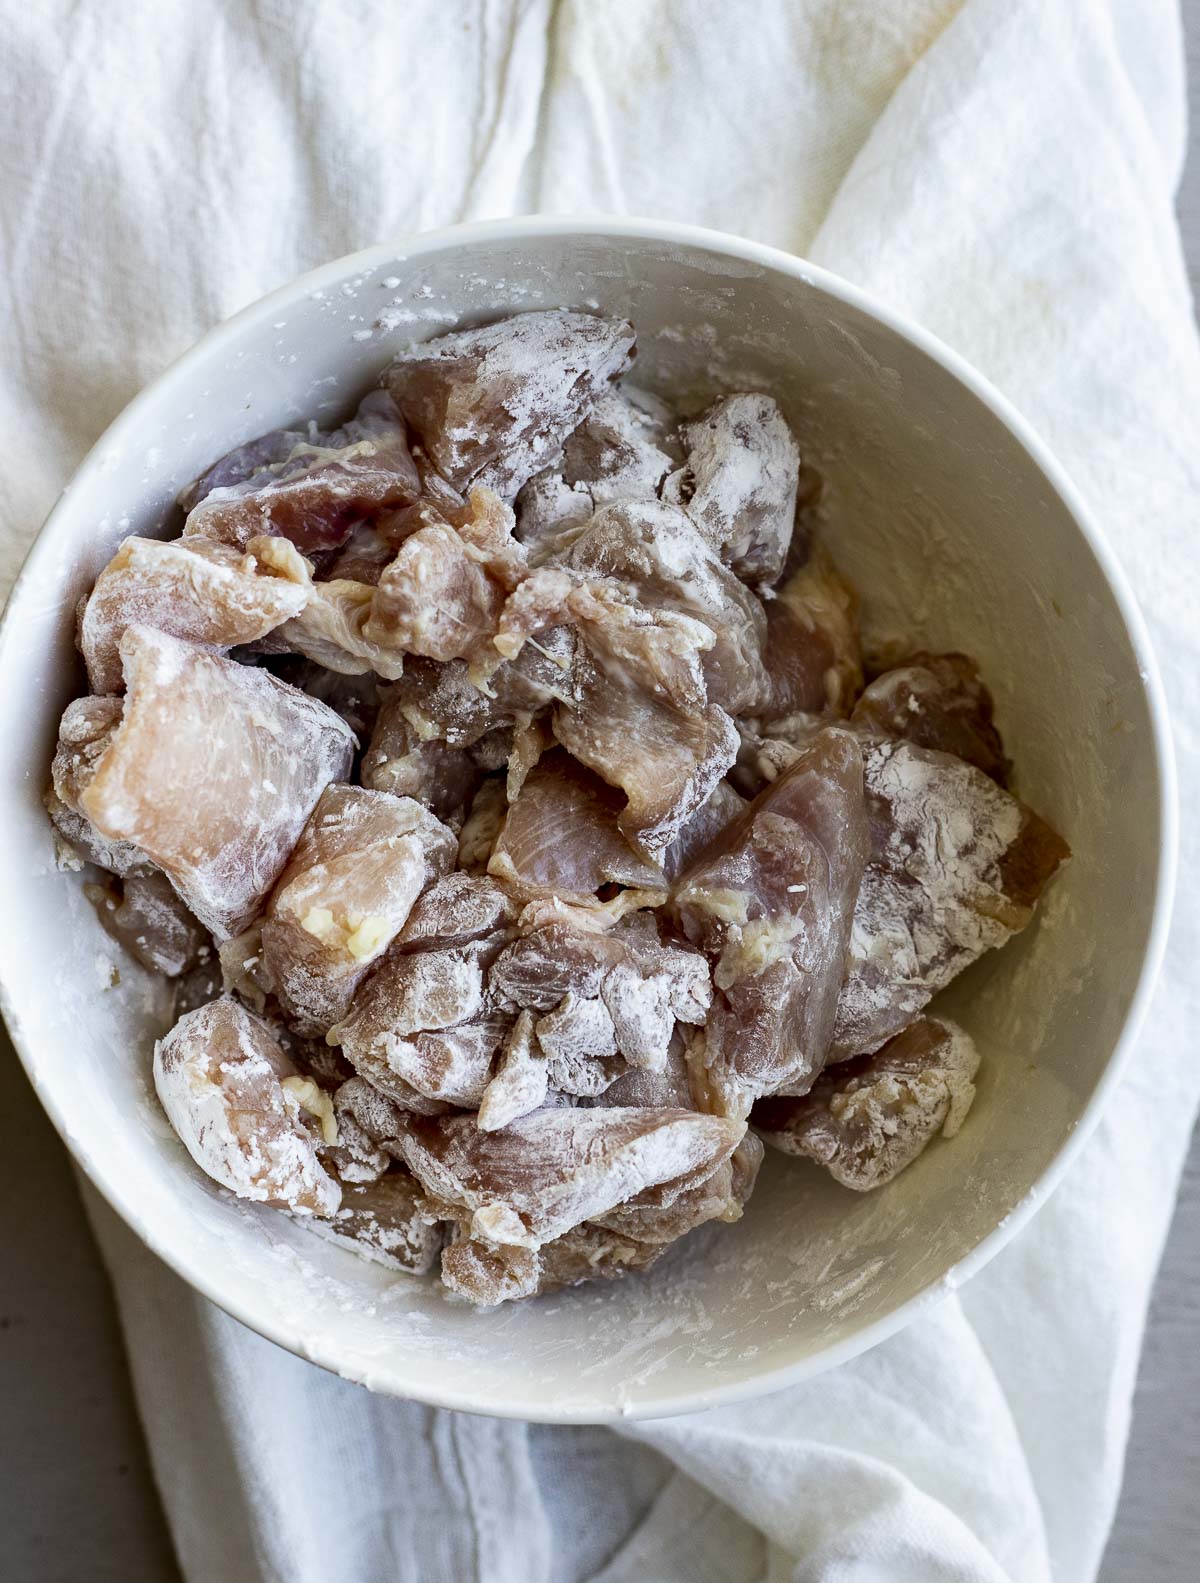 Chicken pieces coated in cornstarch in a white bowl.